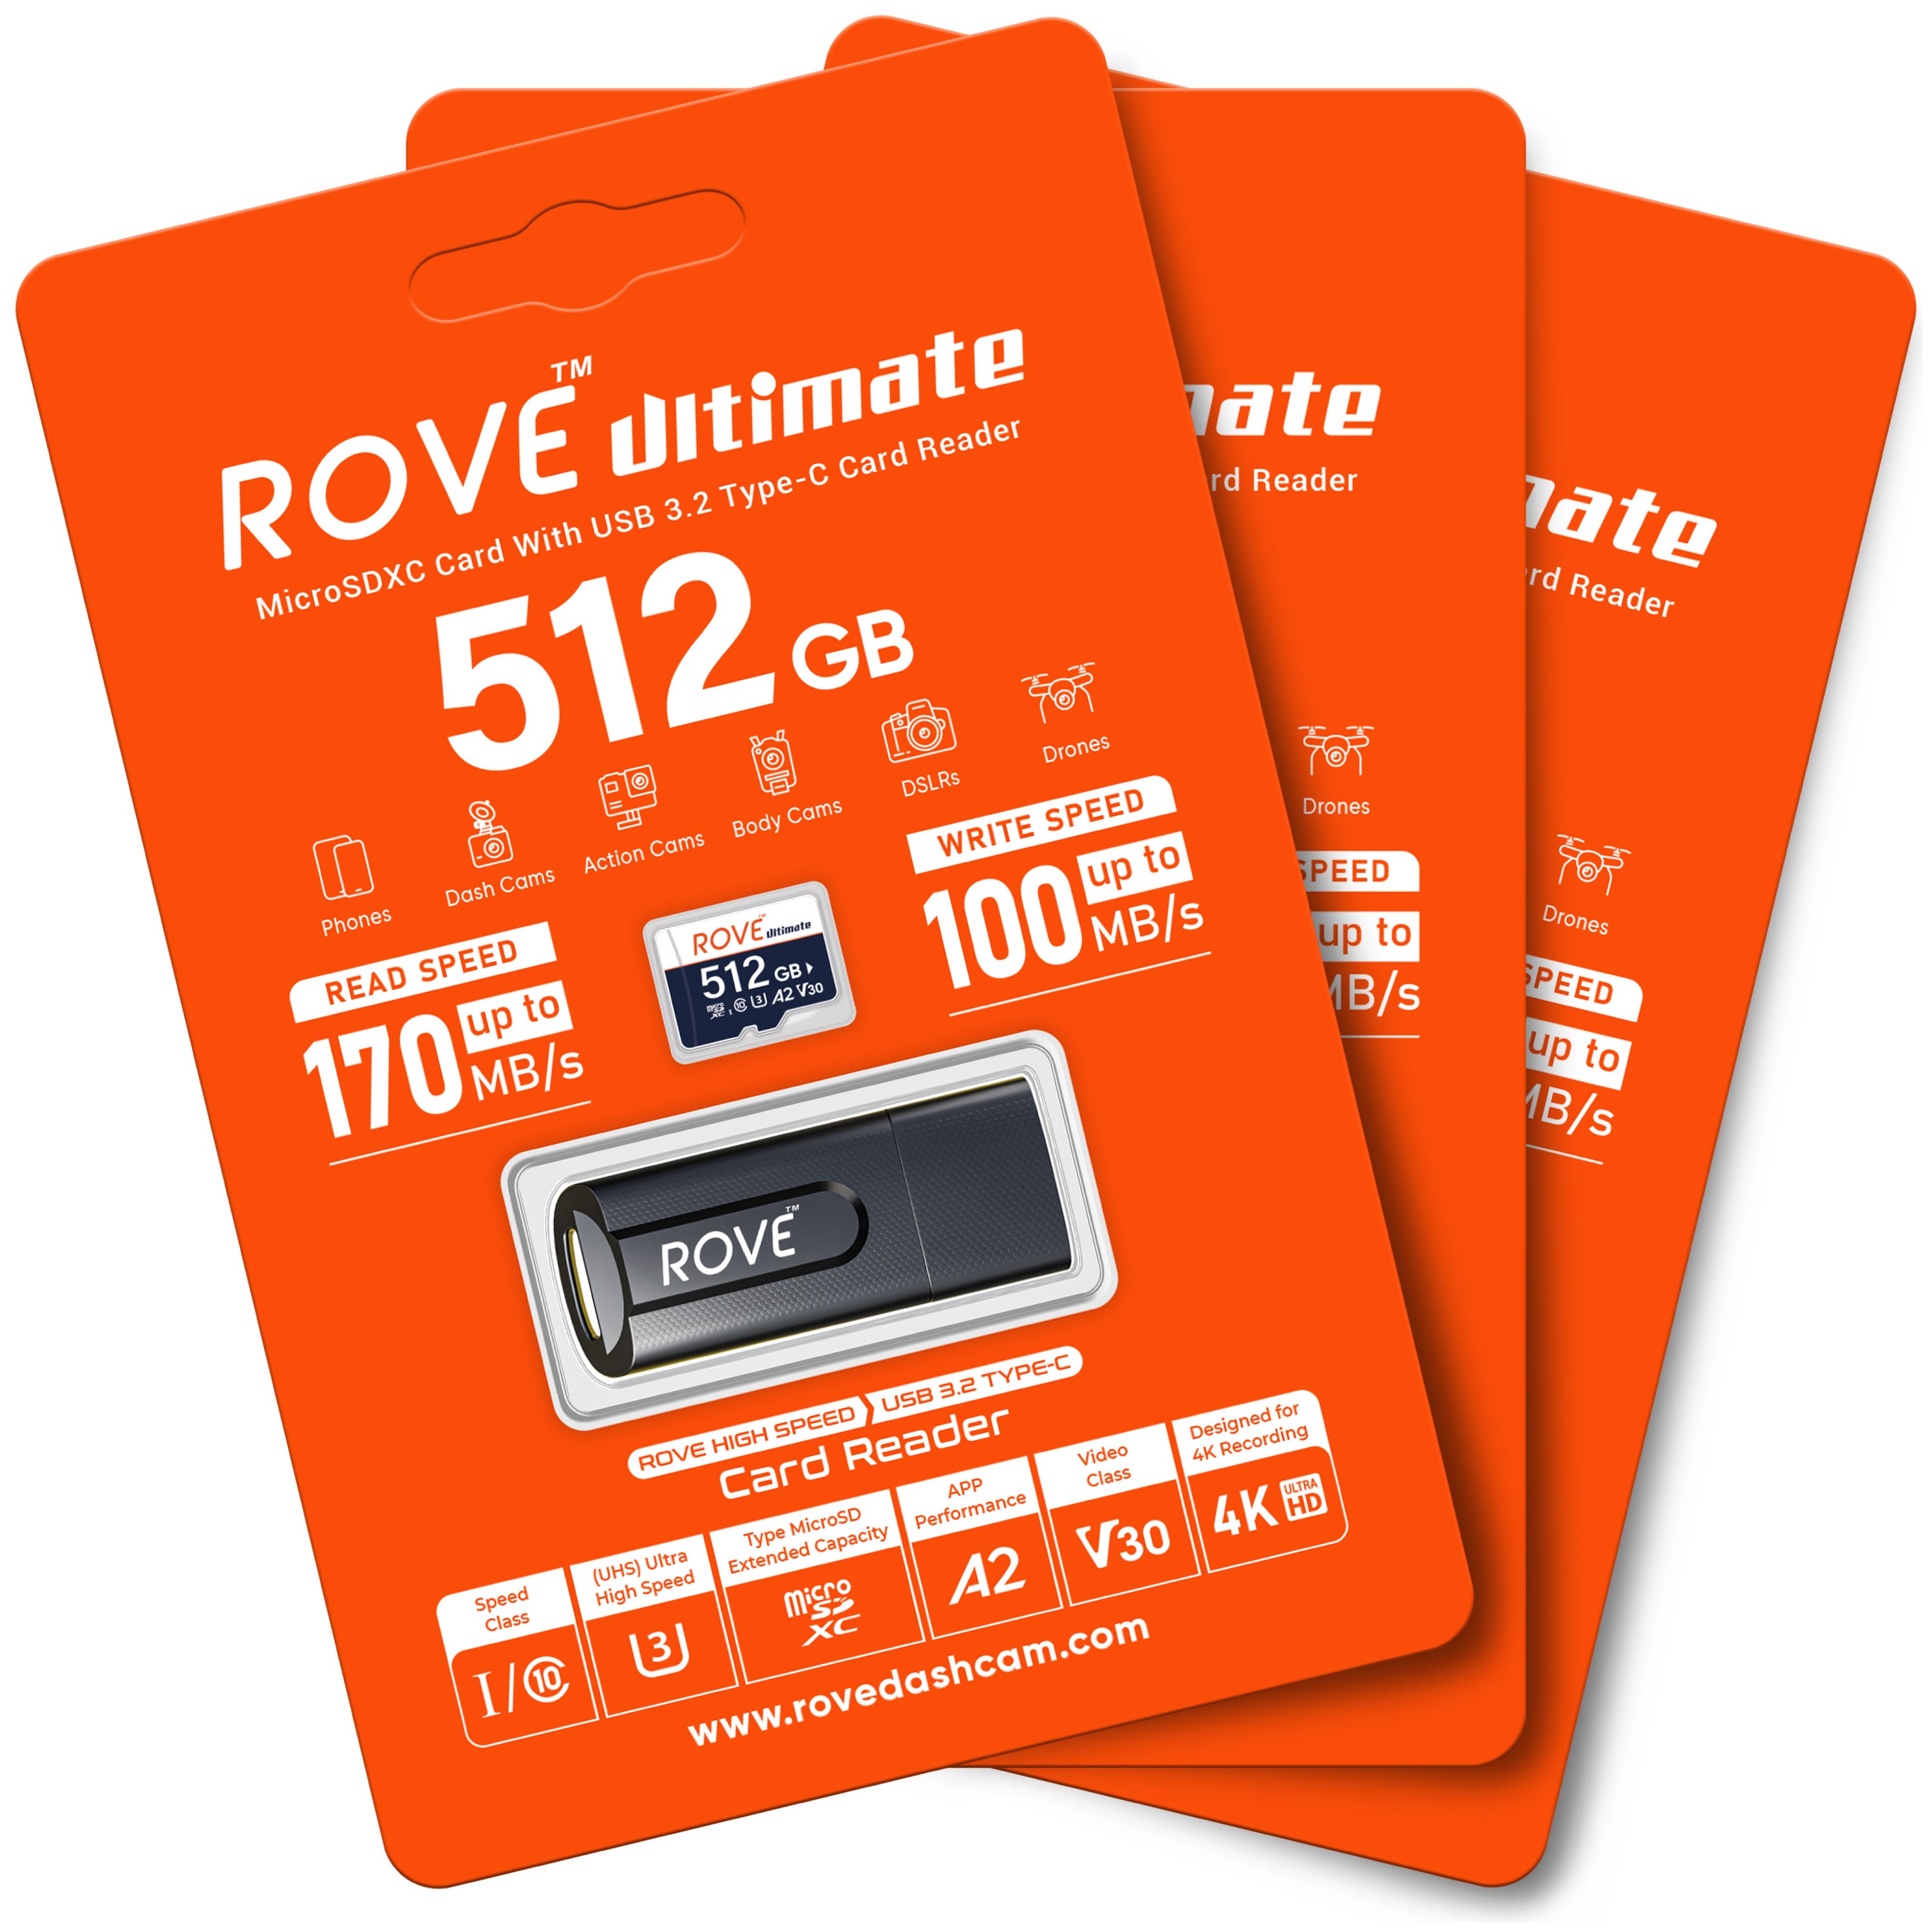 Rove Ultimate 128GB/256GB/512GB Micro SDXC Card with USB 3.2 Gen-1 Type-C card reader, Micro SD memory card for dash cam, Up to 170MB/s Read, 100MB/s Write, U3, Class10